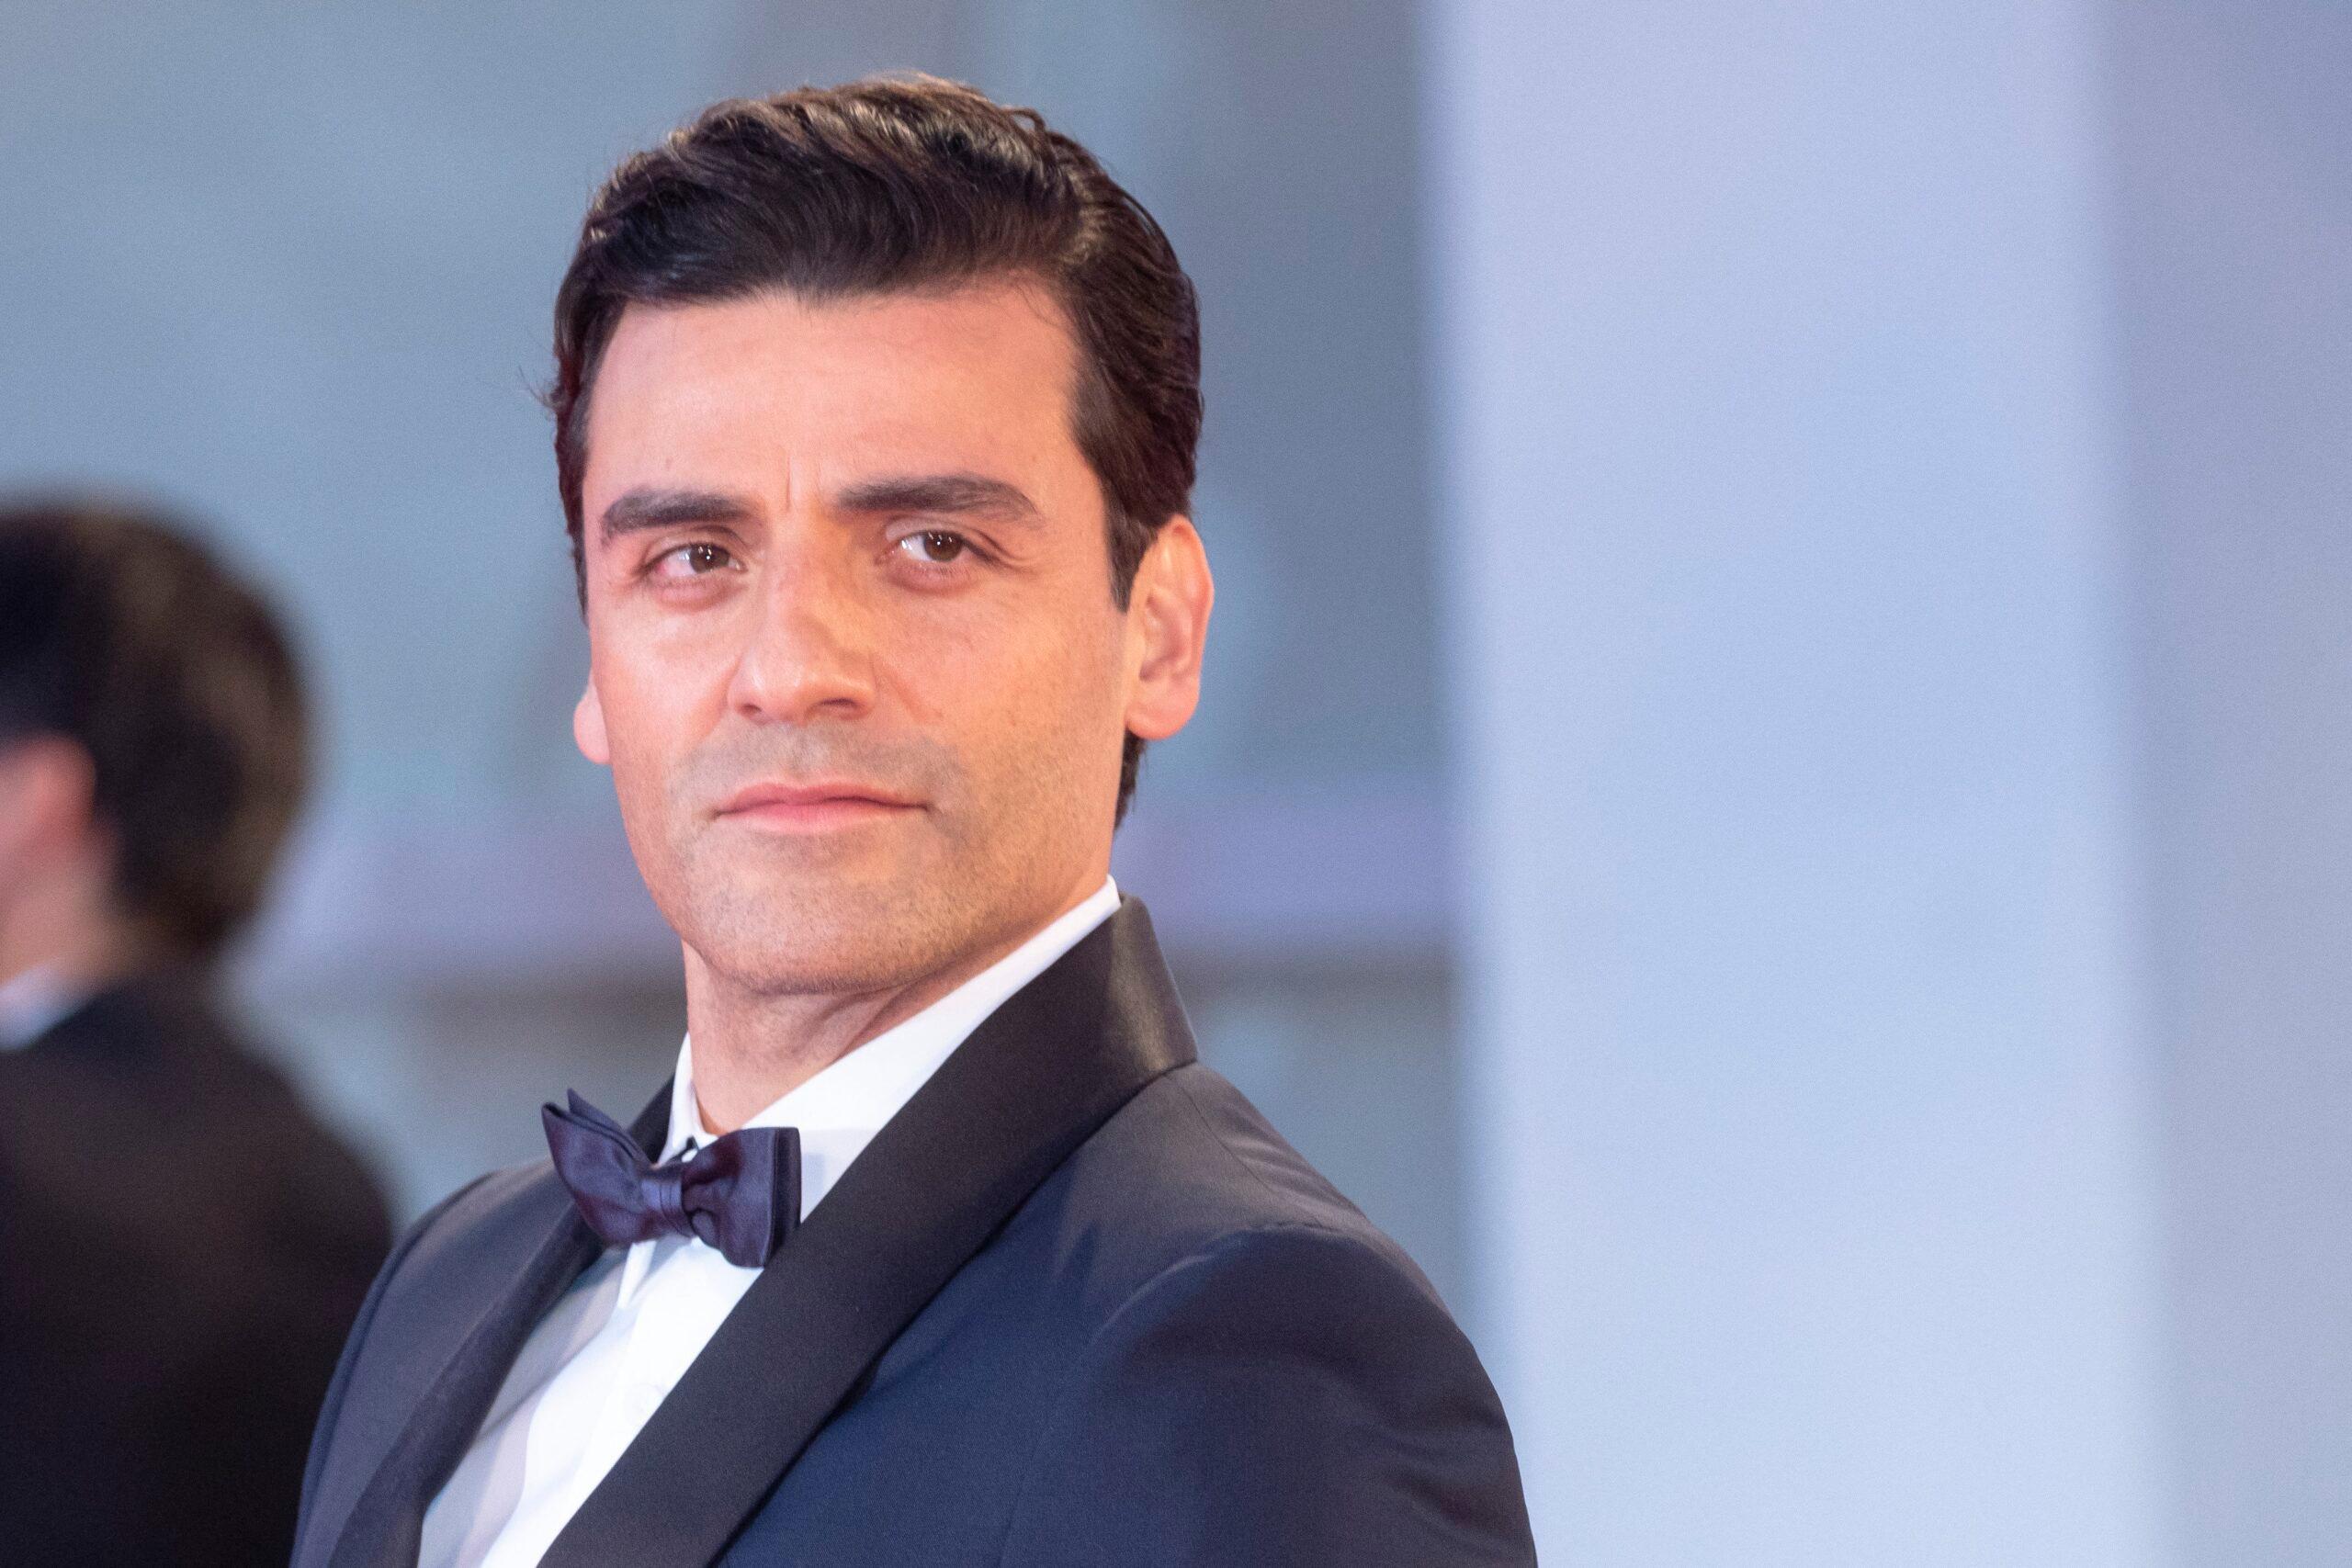 Oscar Isaac at the premiere of 'Scenes From A Marriage (Episodes 1-5)' during the 78th Venice Film Festival at Palazzo del Casino on the Lido in Venice, Italy after appearing in Star Wars